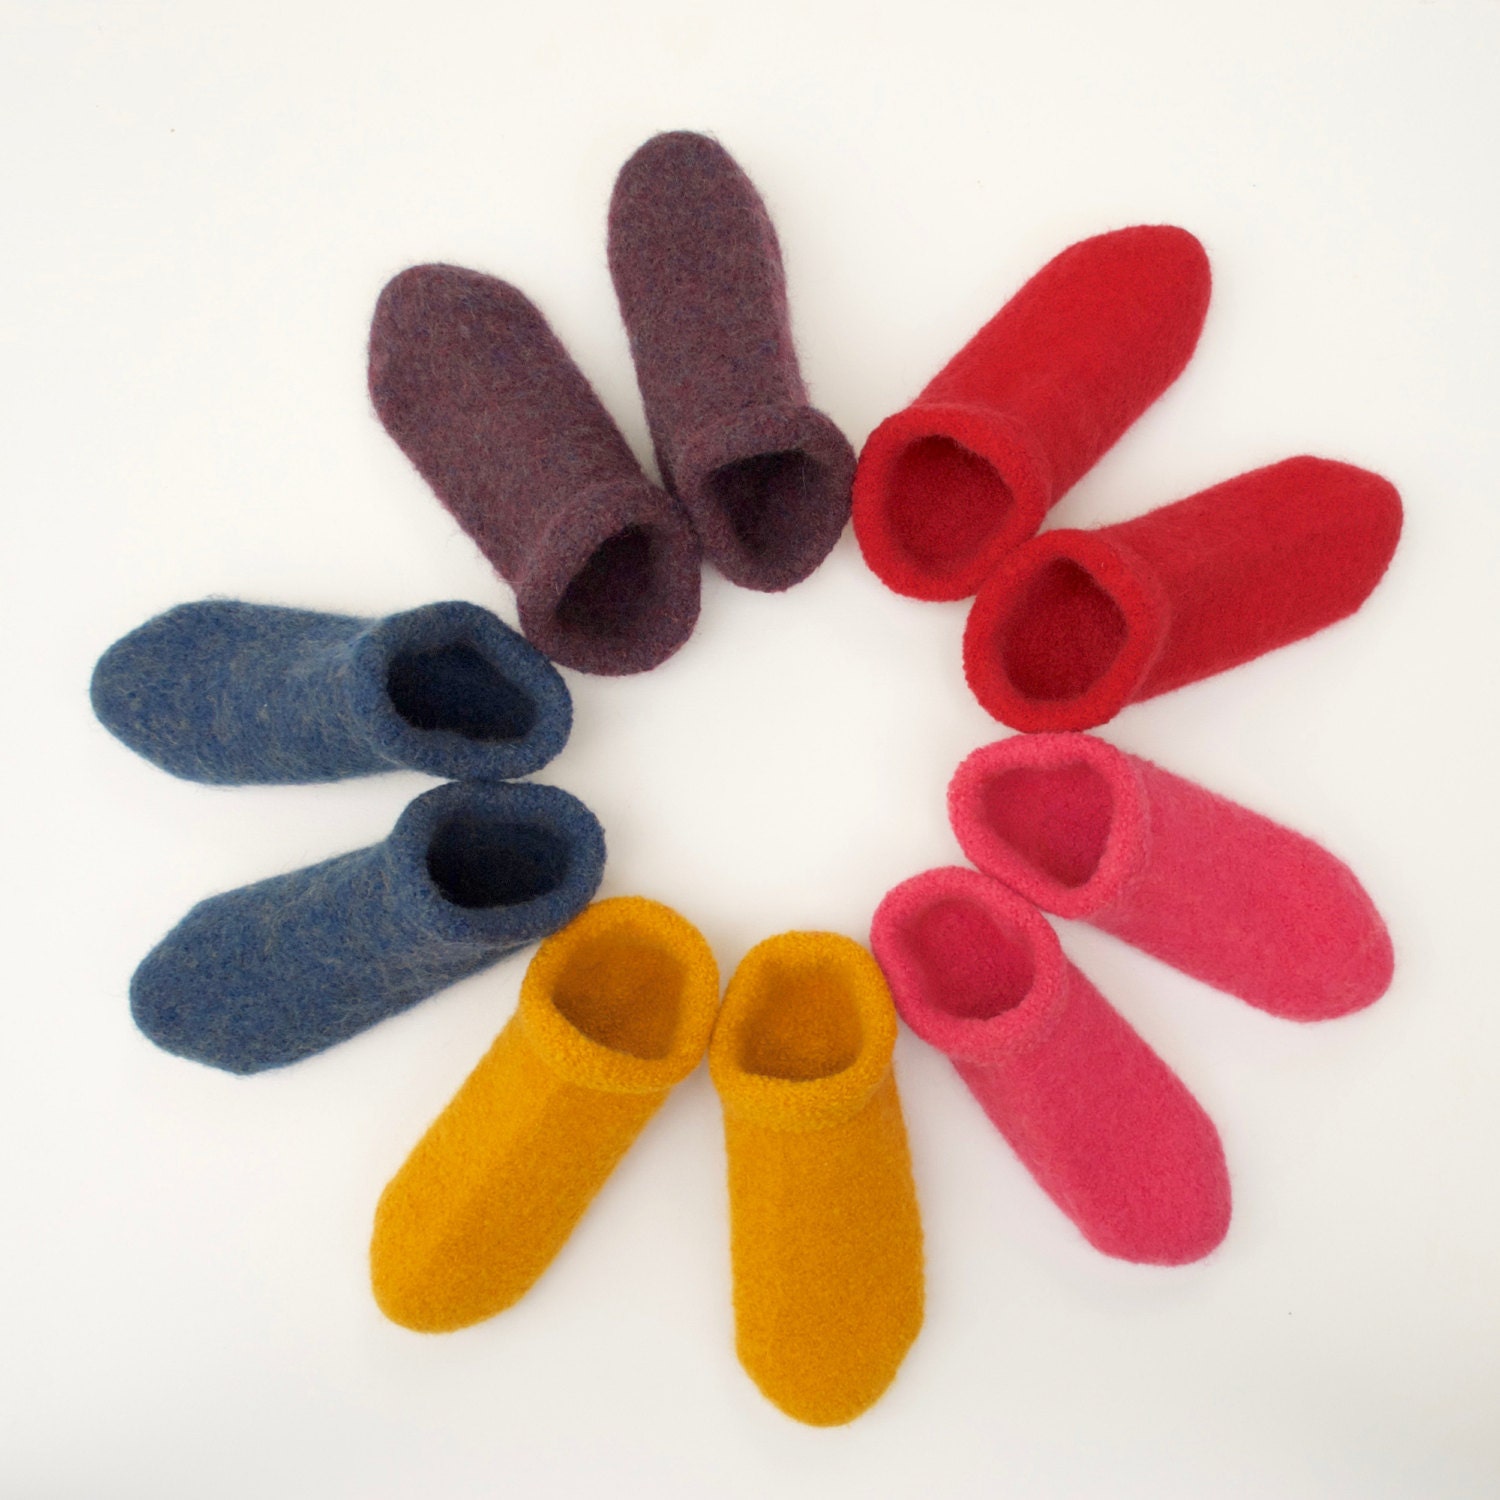 ON SALE Boiled Wool Slippers - Clogs made from Felted Merino Wool ...